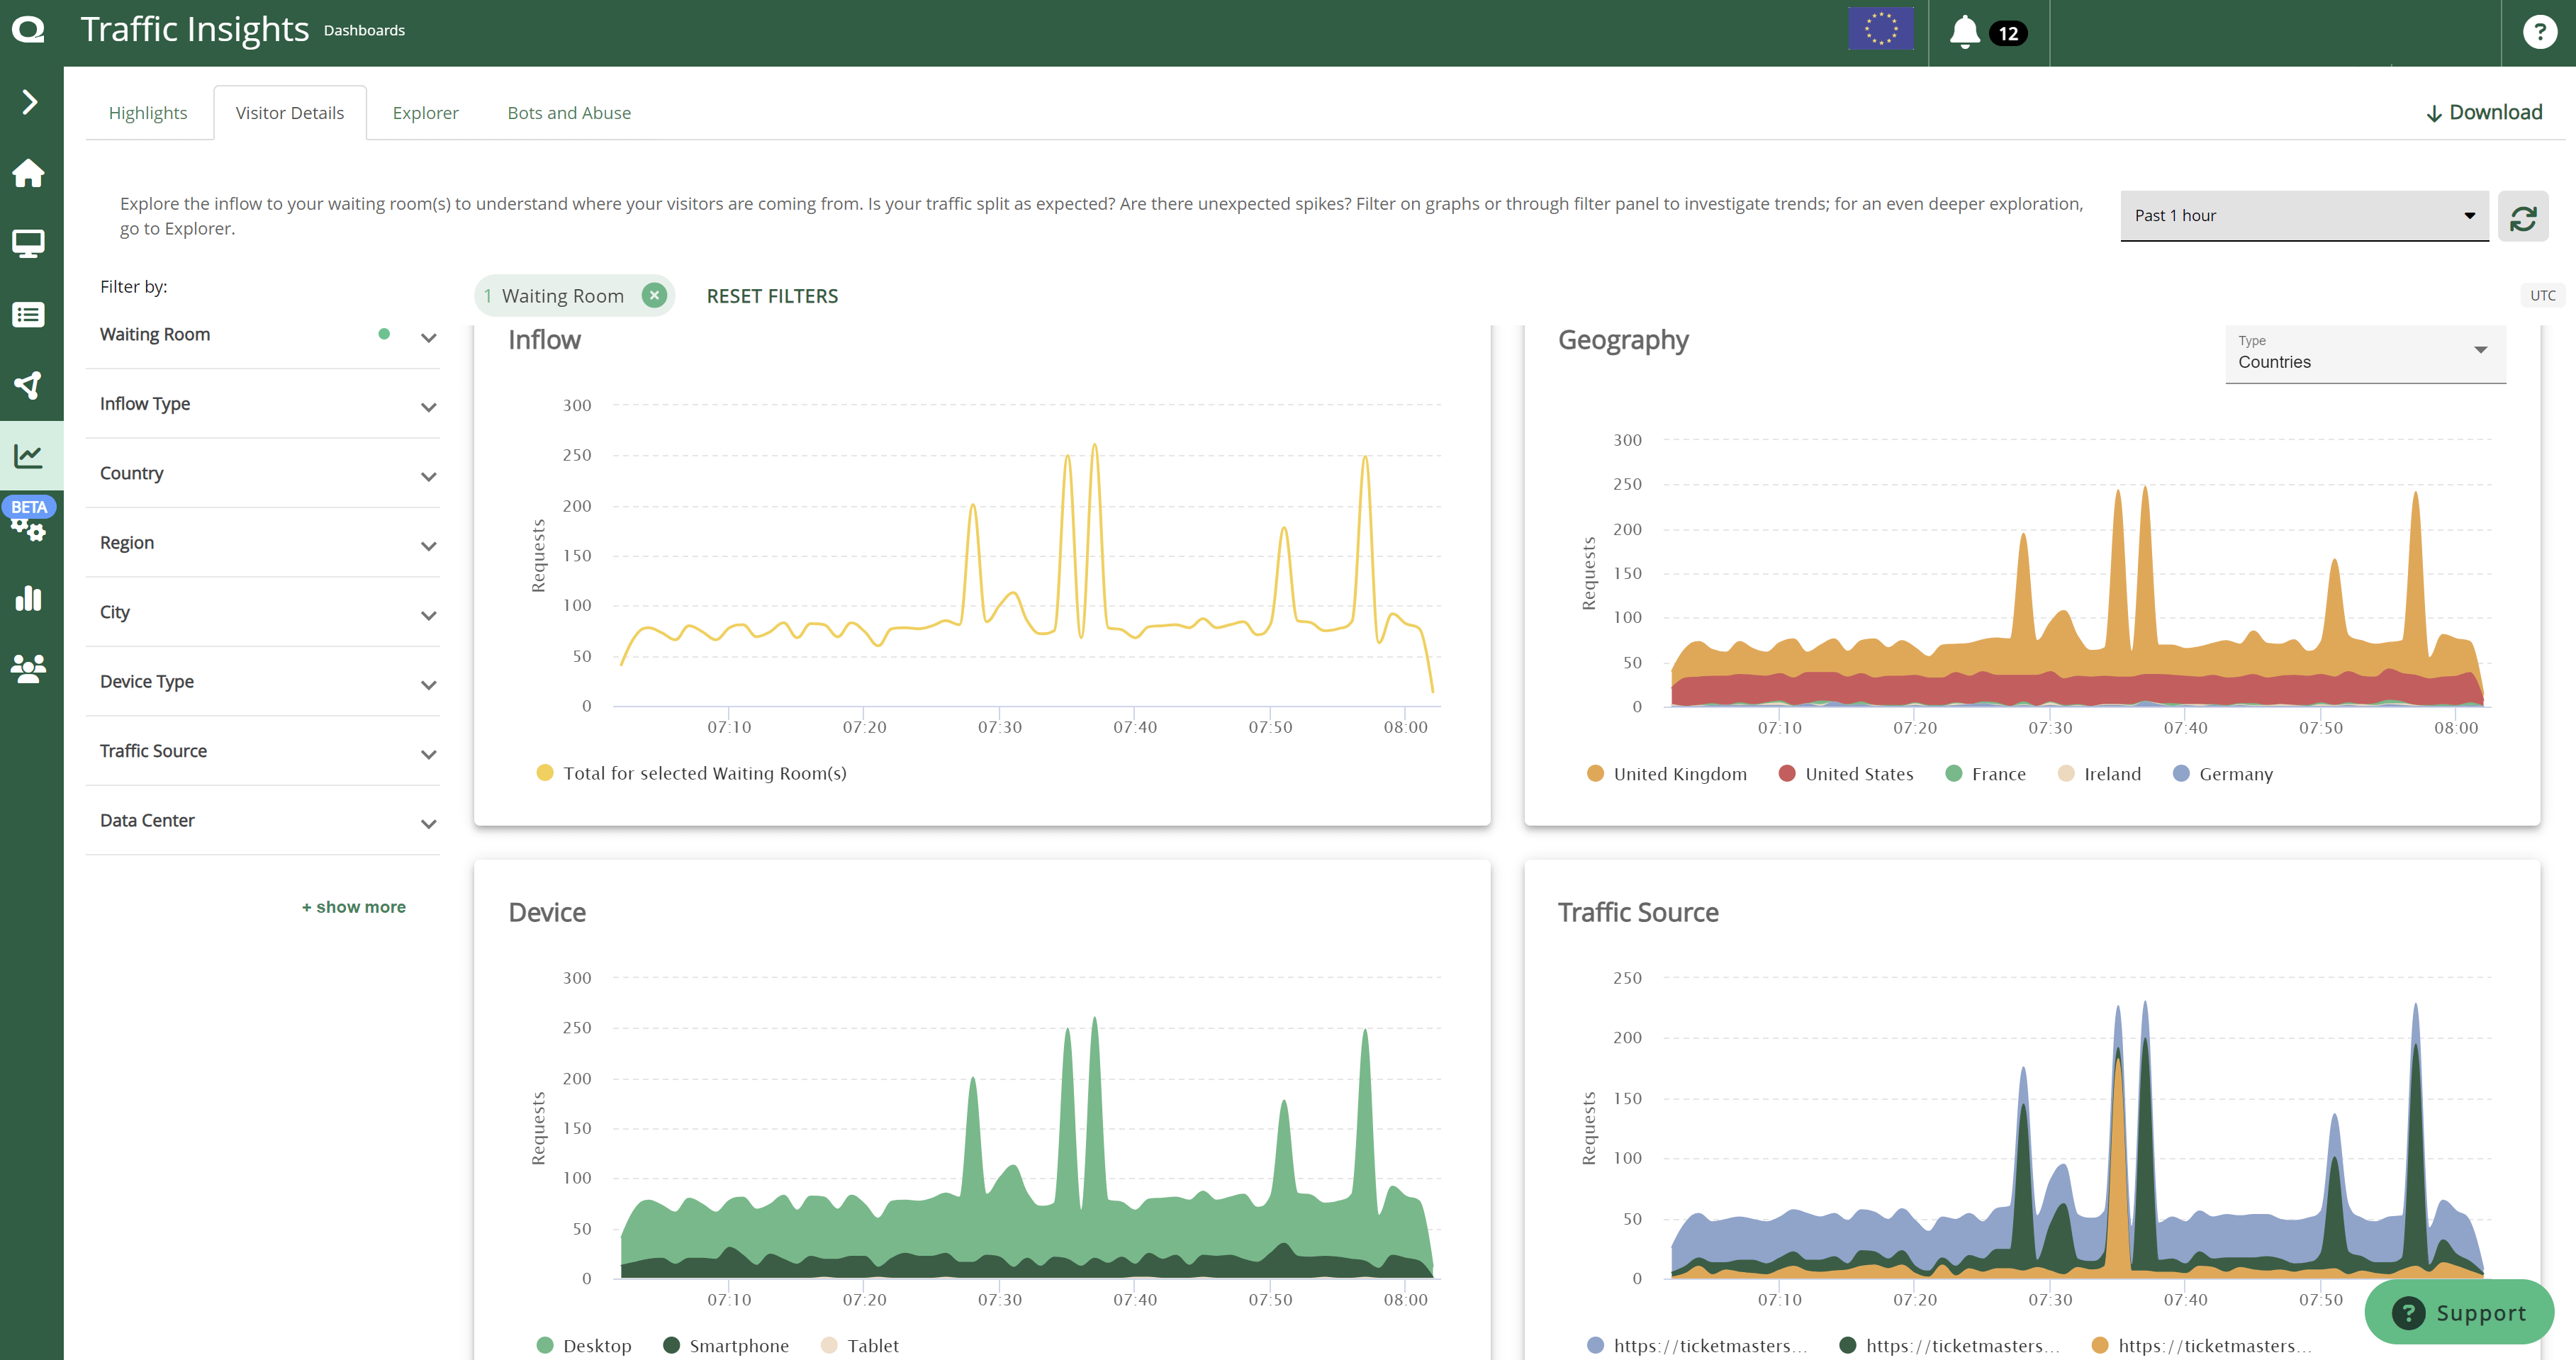 Traffic Insights Visitor Details page